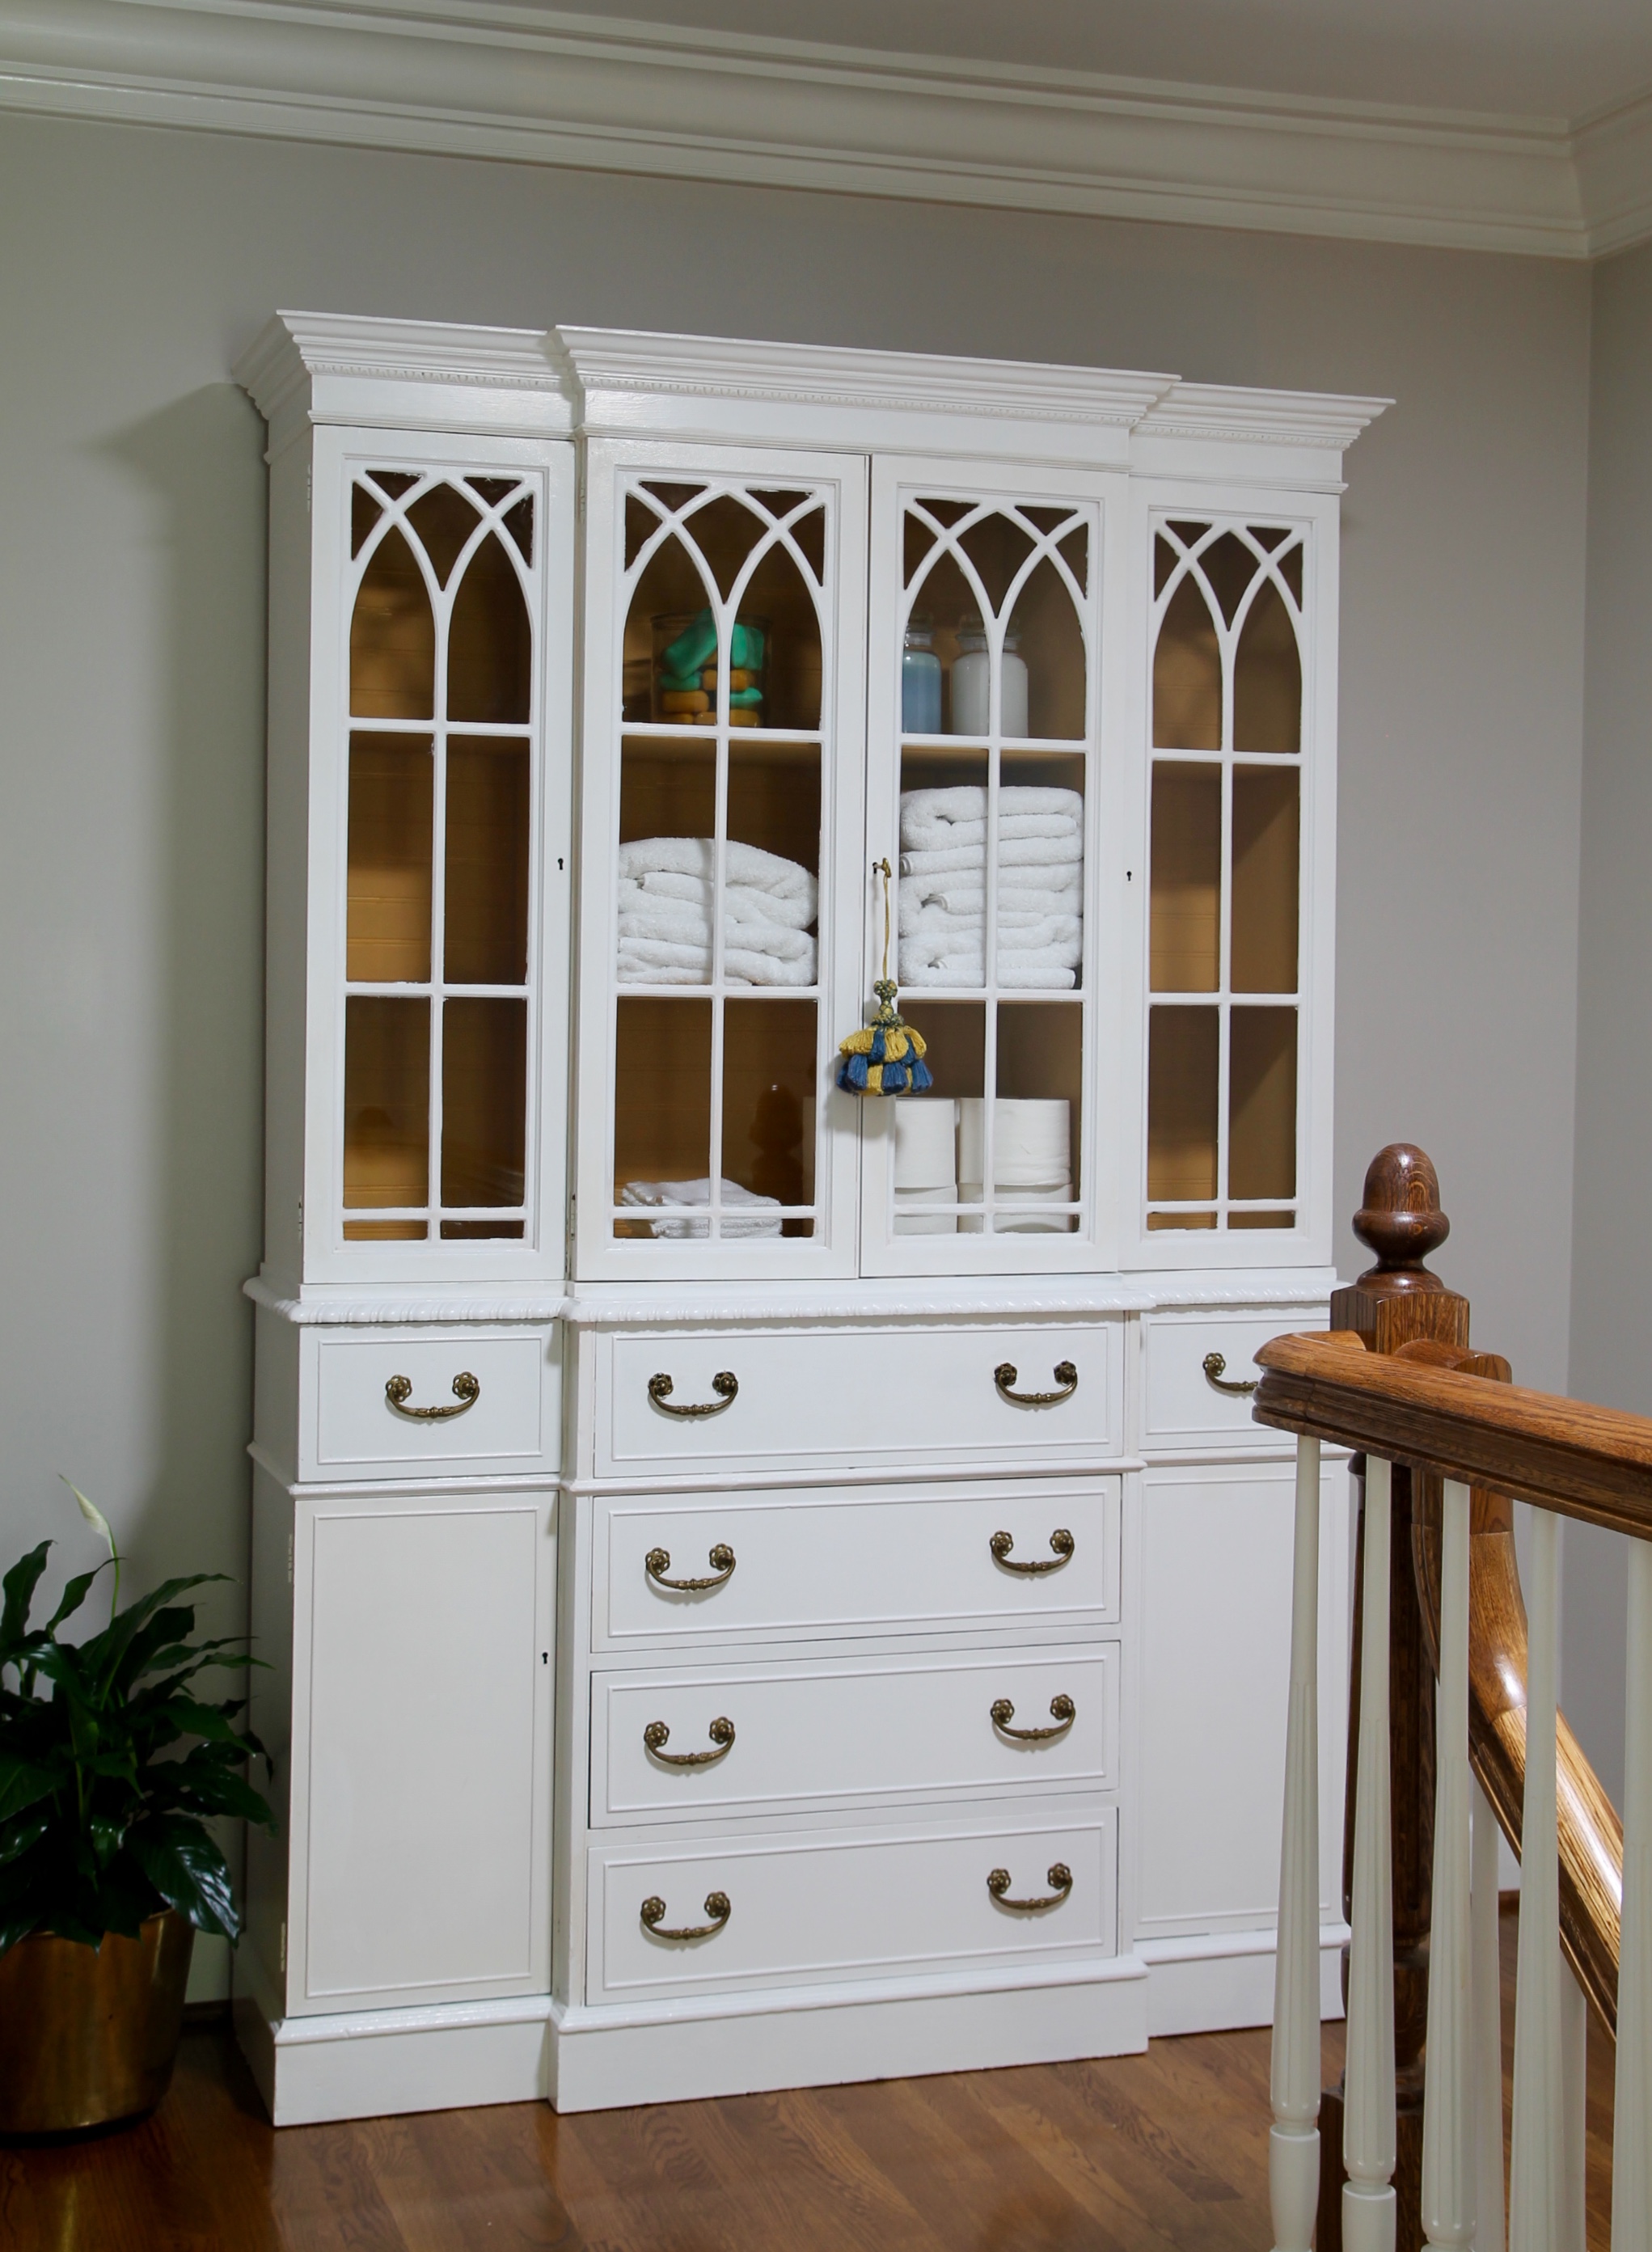 IMG 3019 - Converting a China Cabinet into a Linen Cabinet